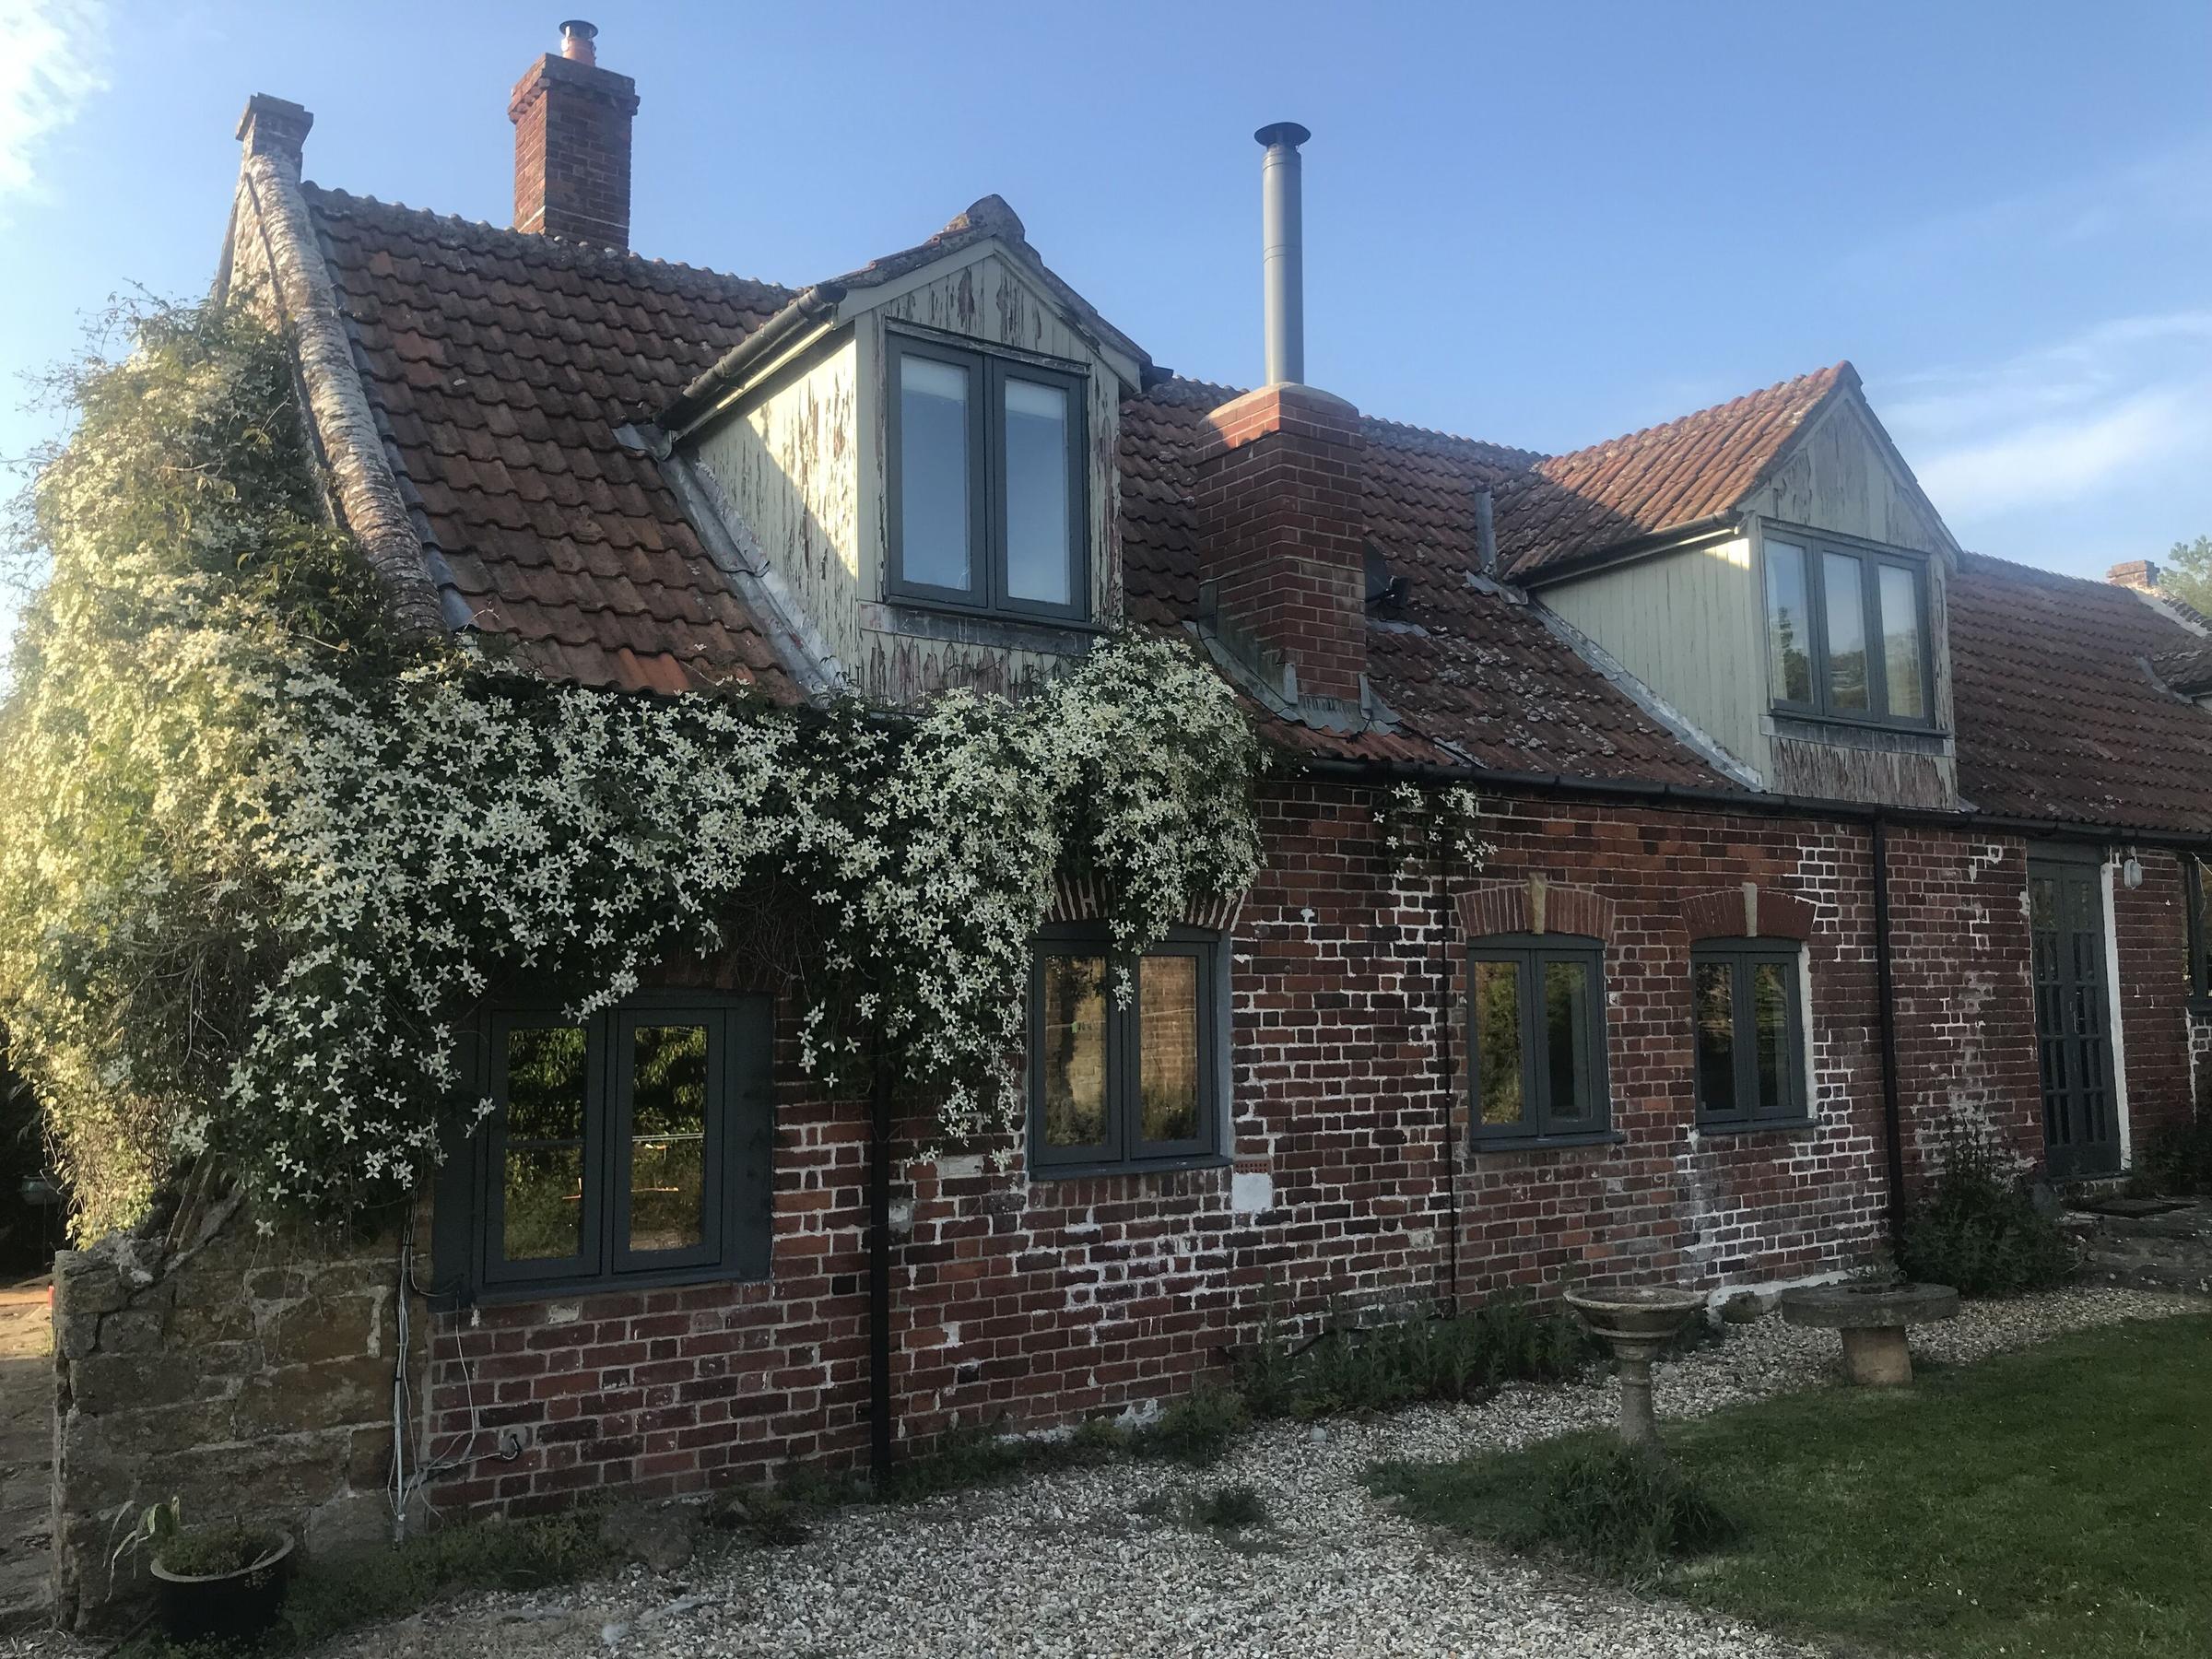 Pet Friendly Charming Cottage in Peaceful Countryside